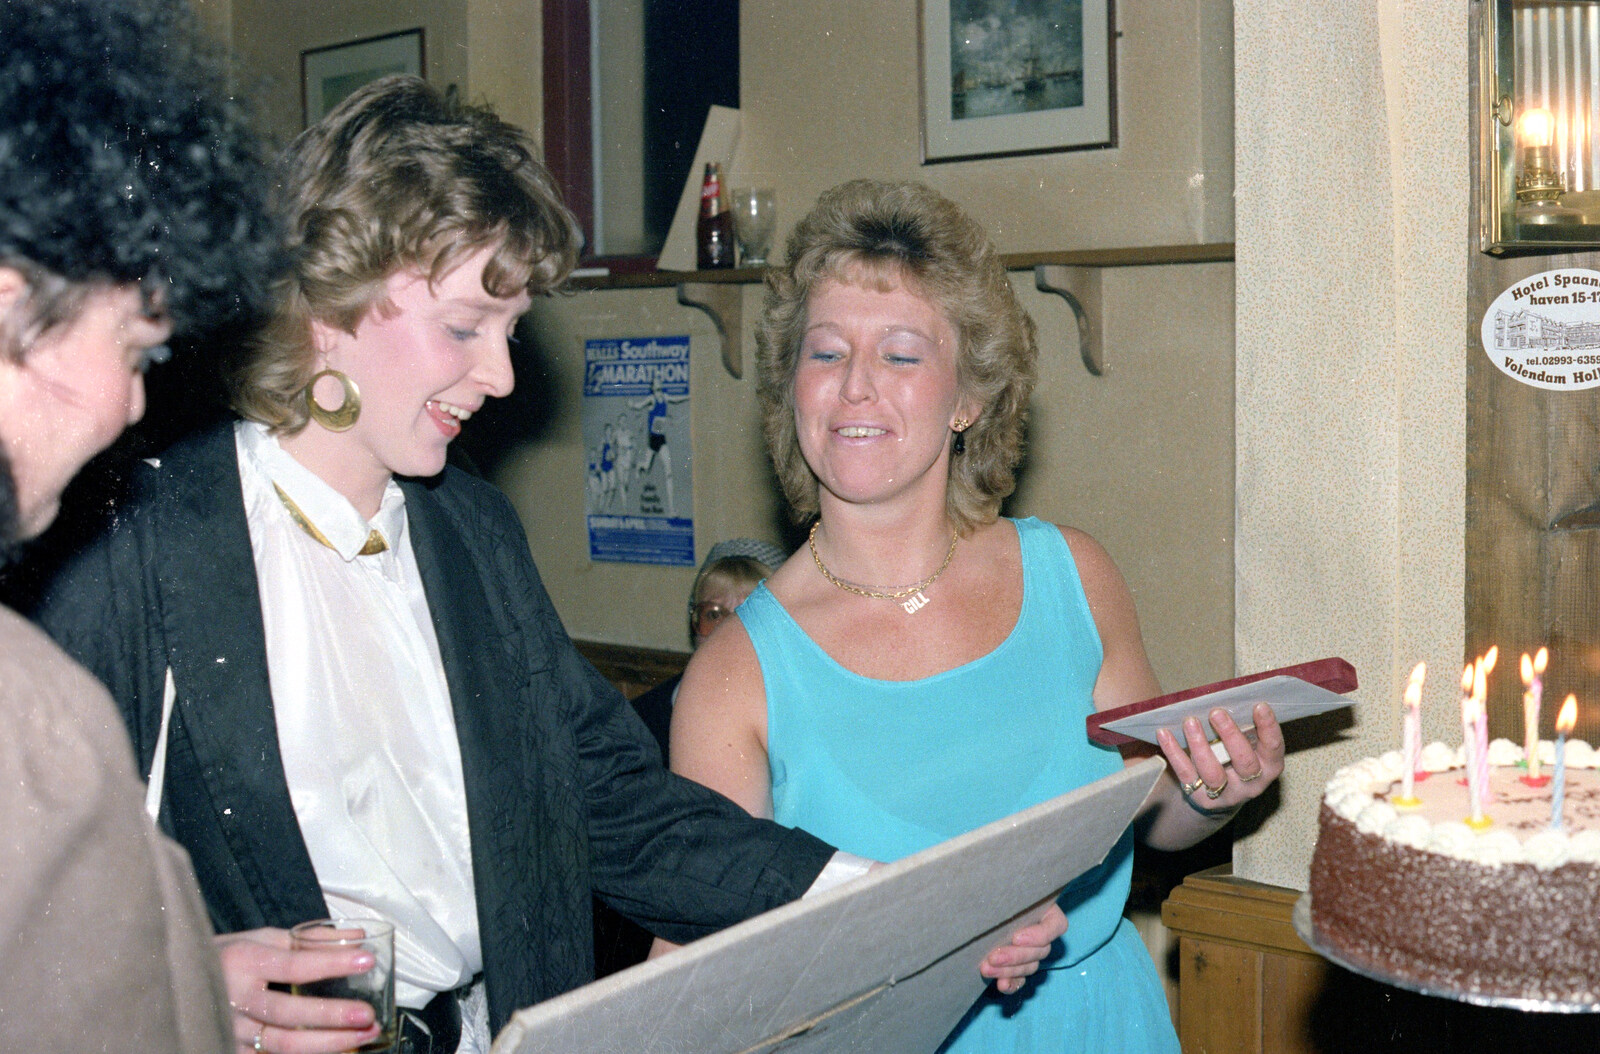 Birthday girl gets a present in the JSV from Uni: RAG Week Abseil, Hitch Hike, and Beaumont Street Life Plymouth, Devon - 13th February 1986